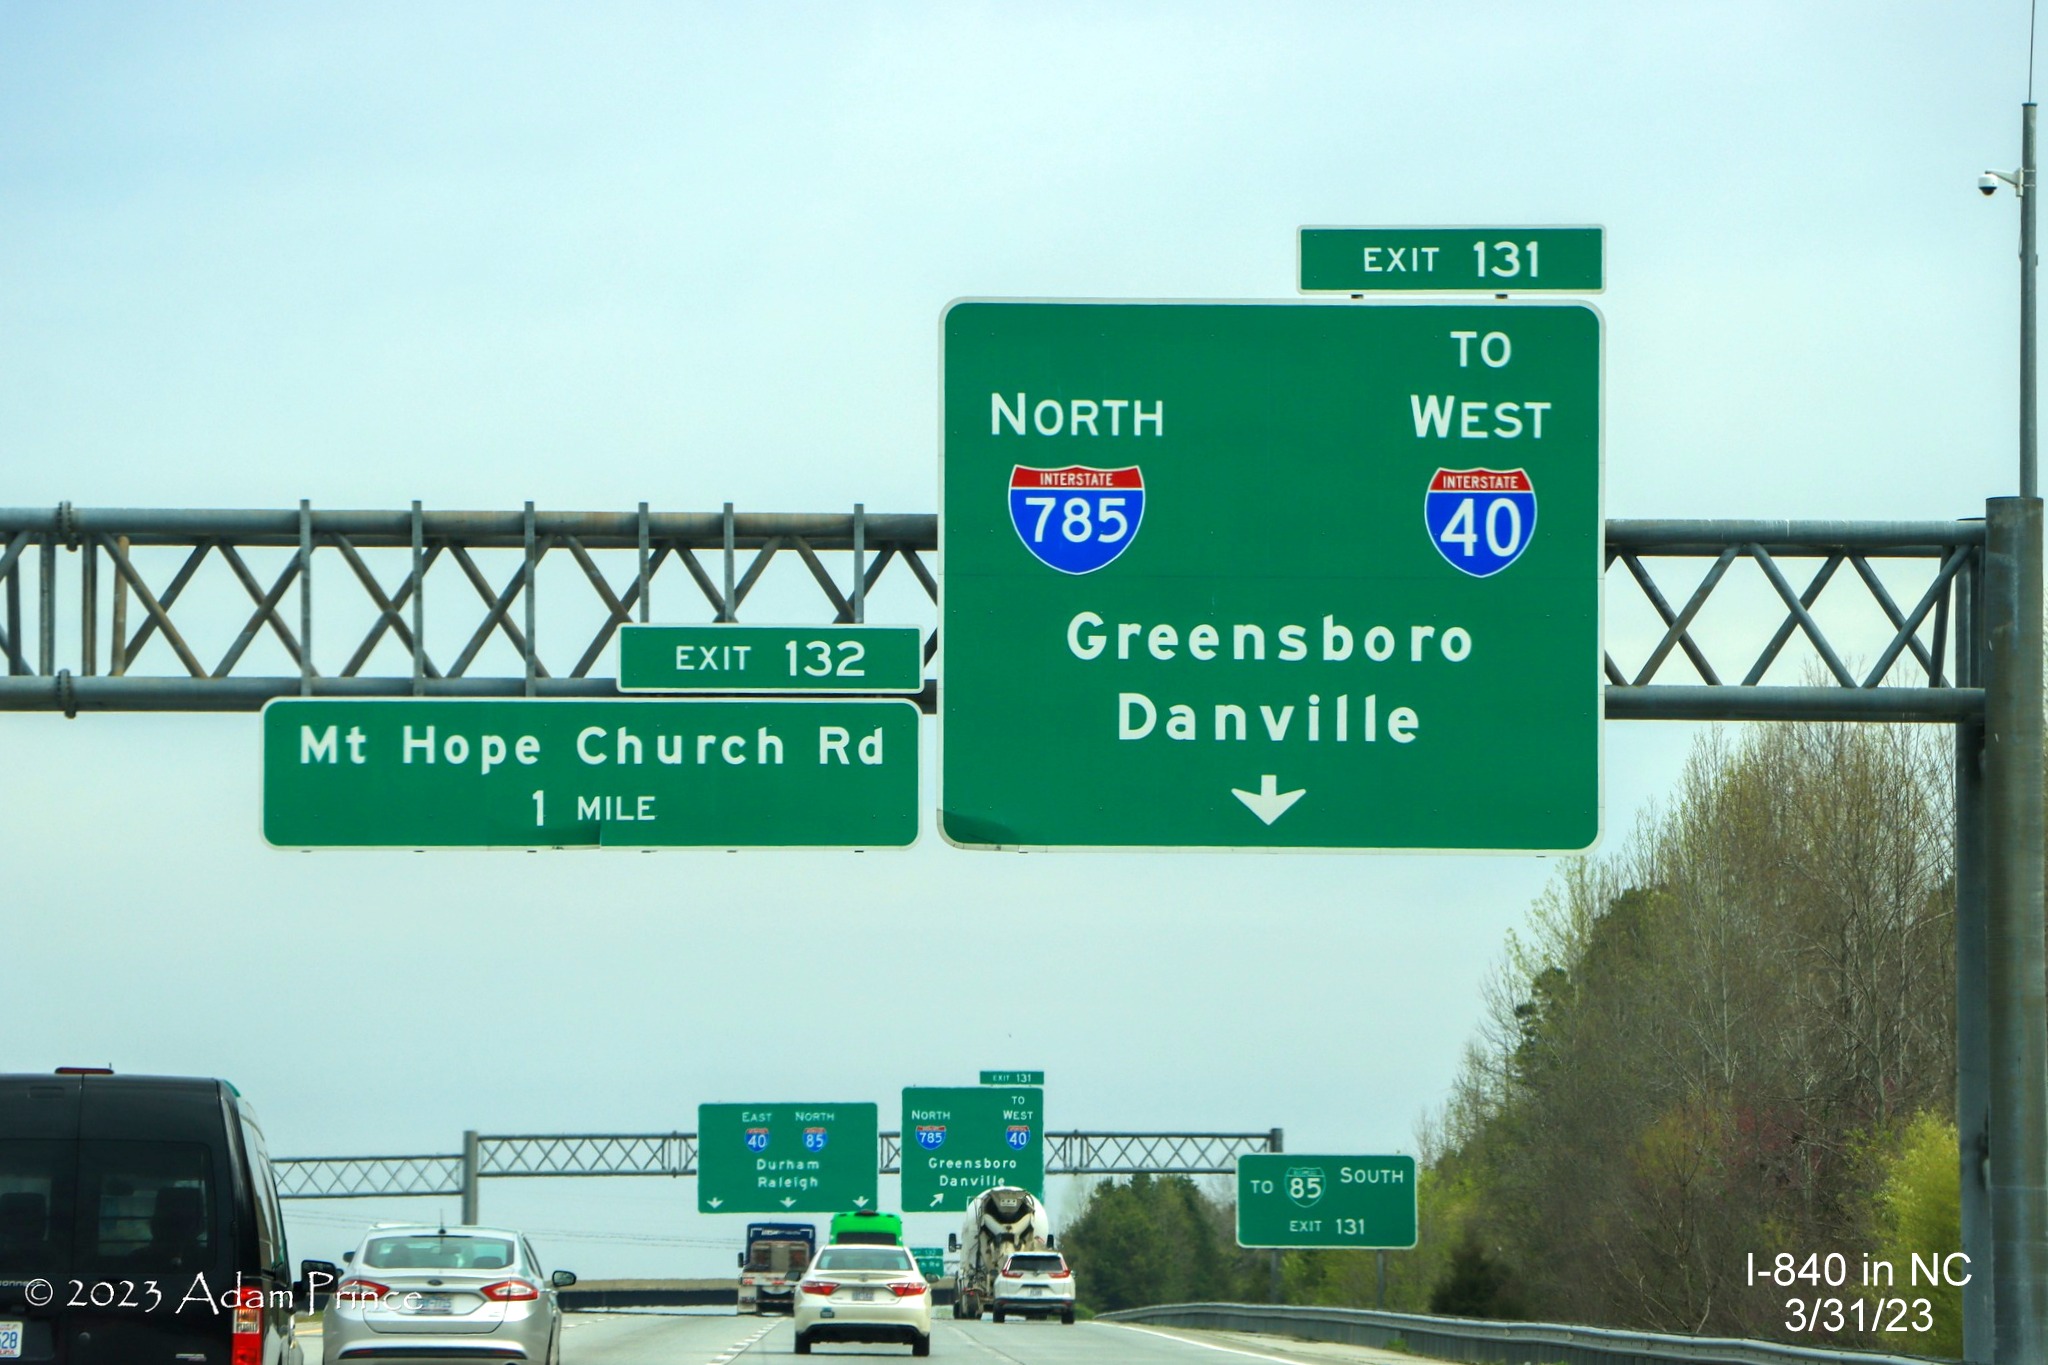 Image of overhead exit sign for northern section of Greensboro Loop on I-85 North still missing 
                                              I-840 shield, Adam Prince,  March 2023